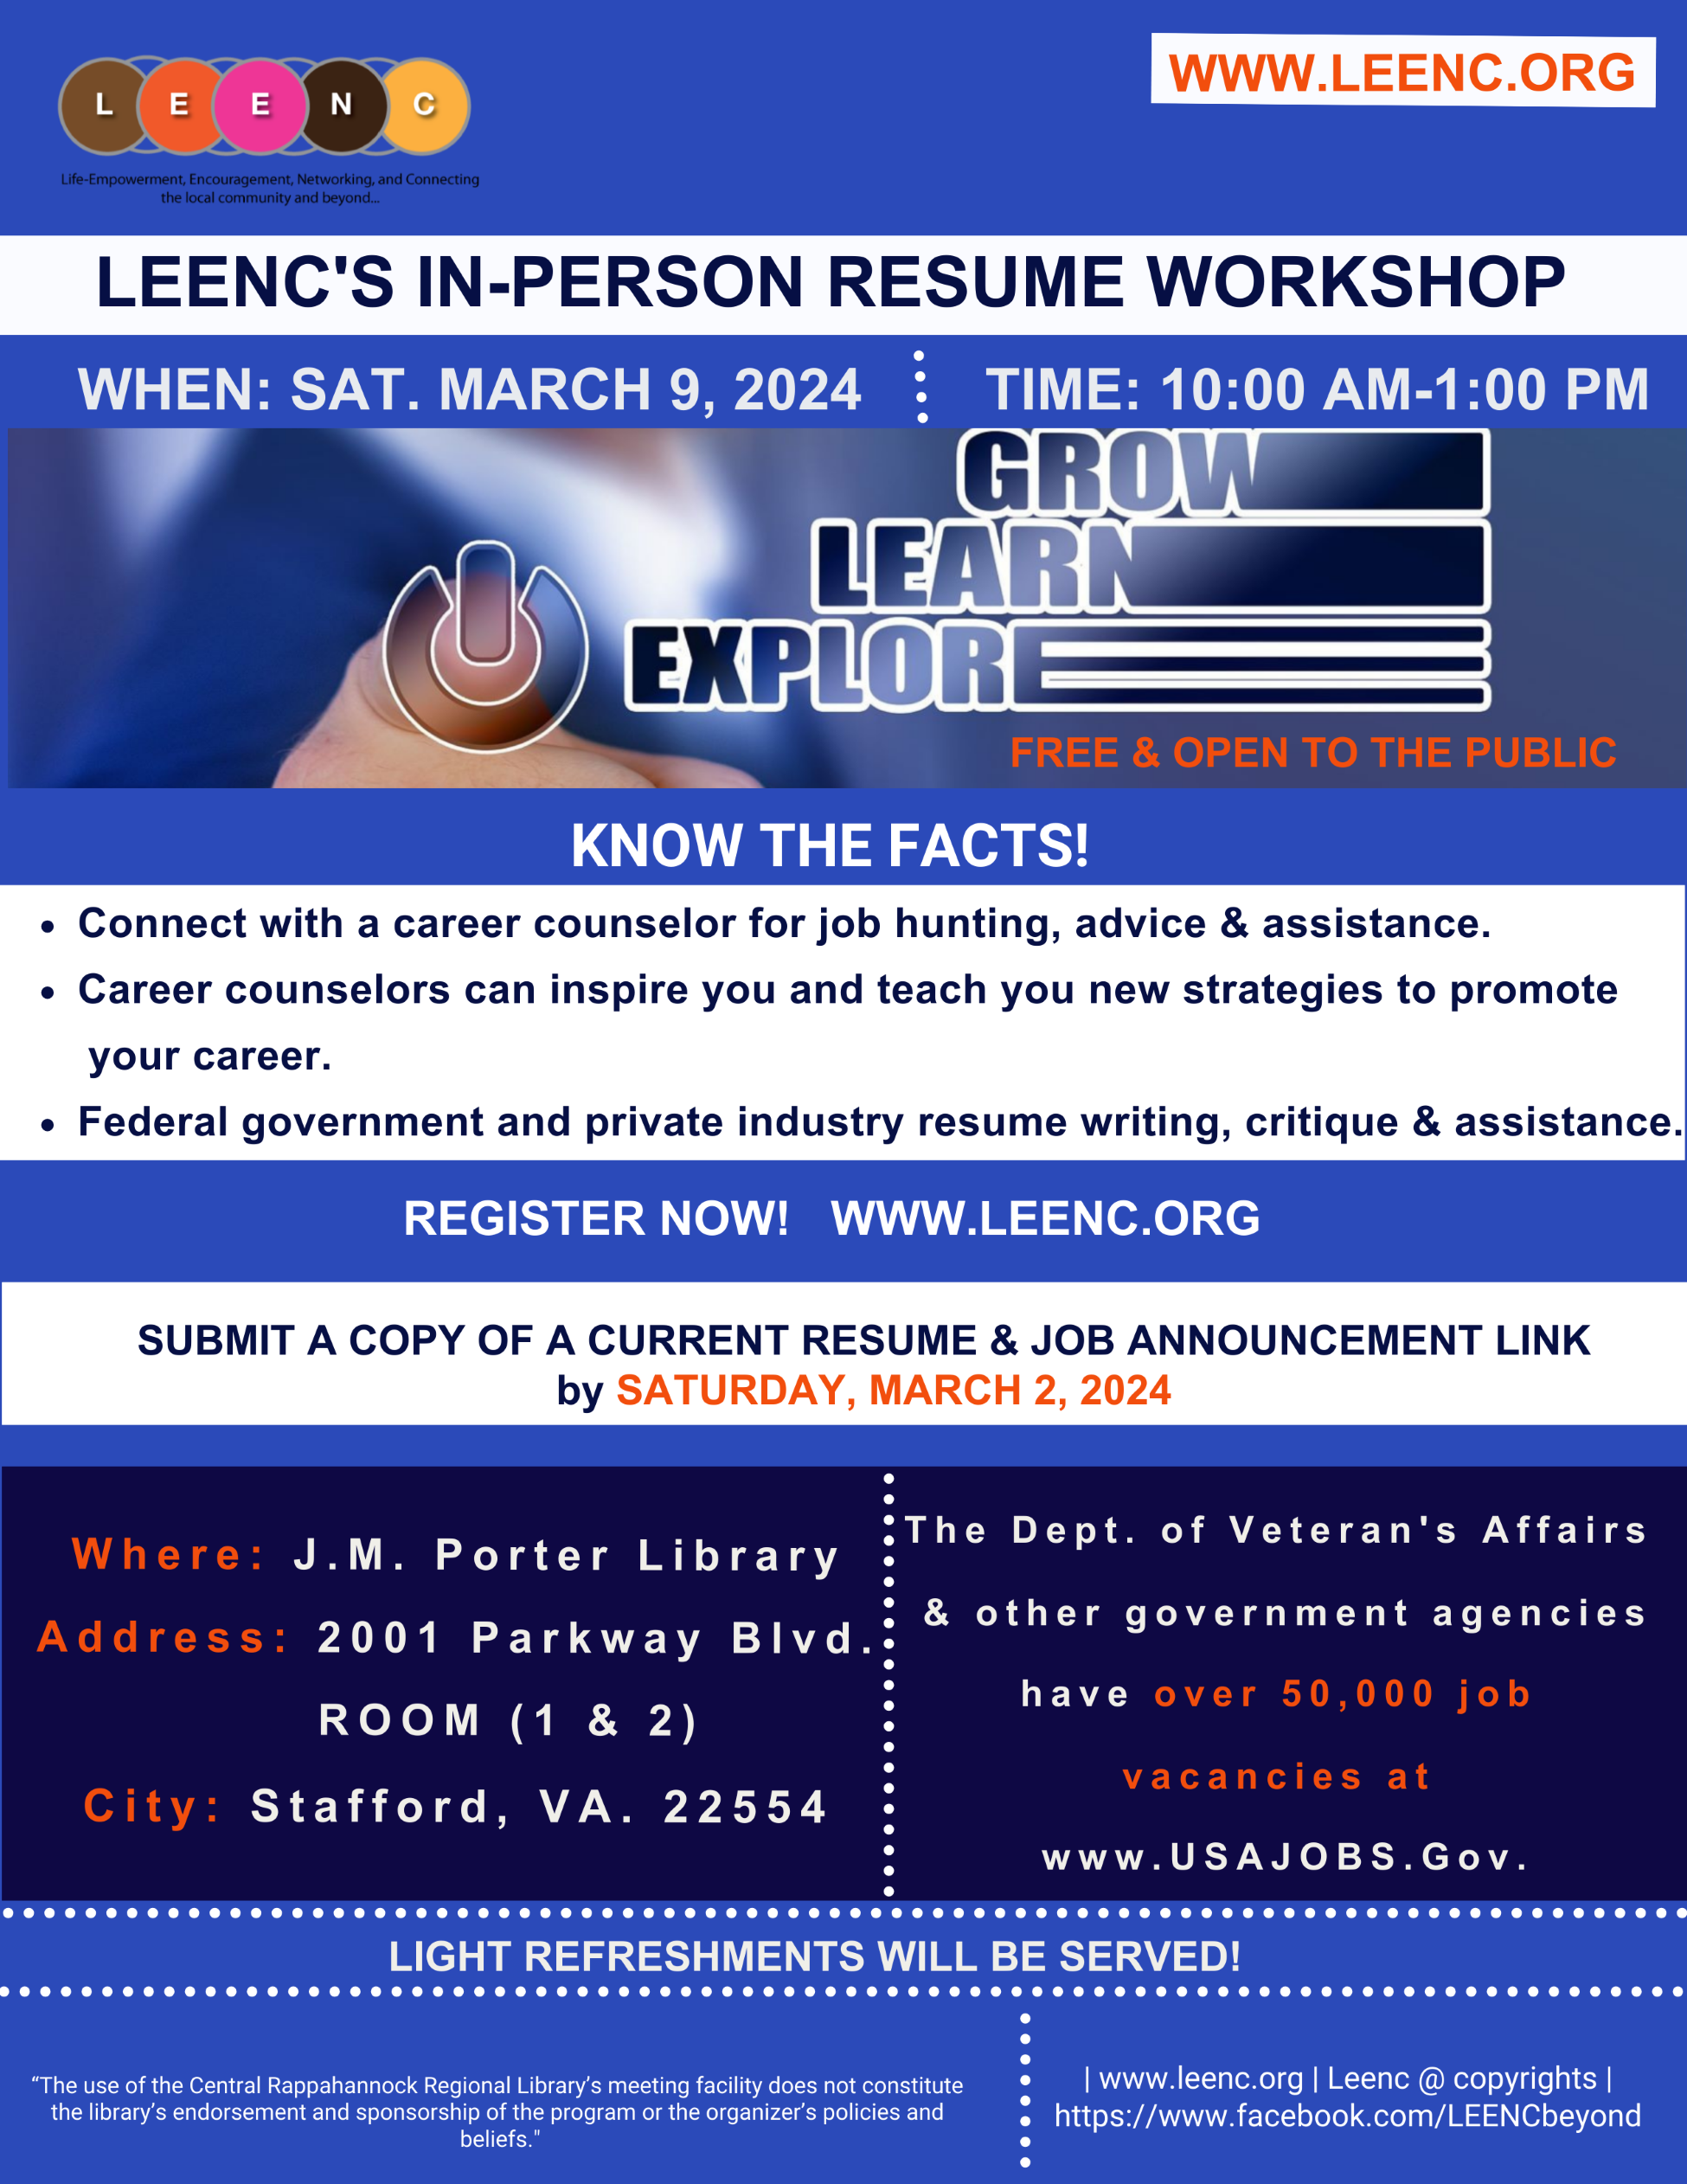 <h1 class="tribe-events-single-event-title">In-Person Resume Workshop</h1>